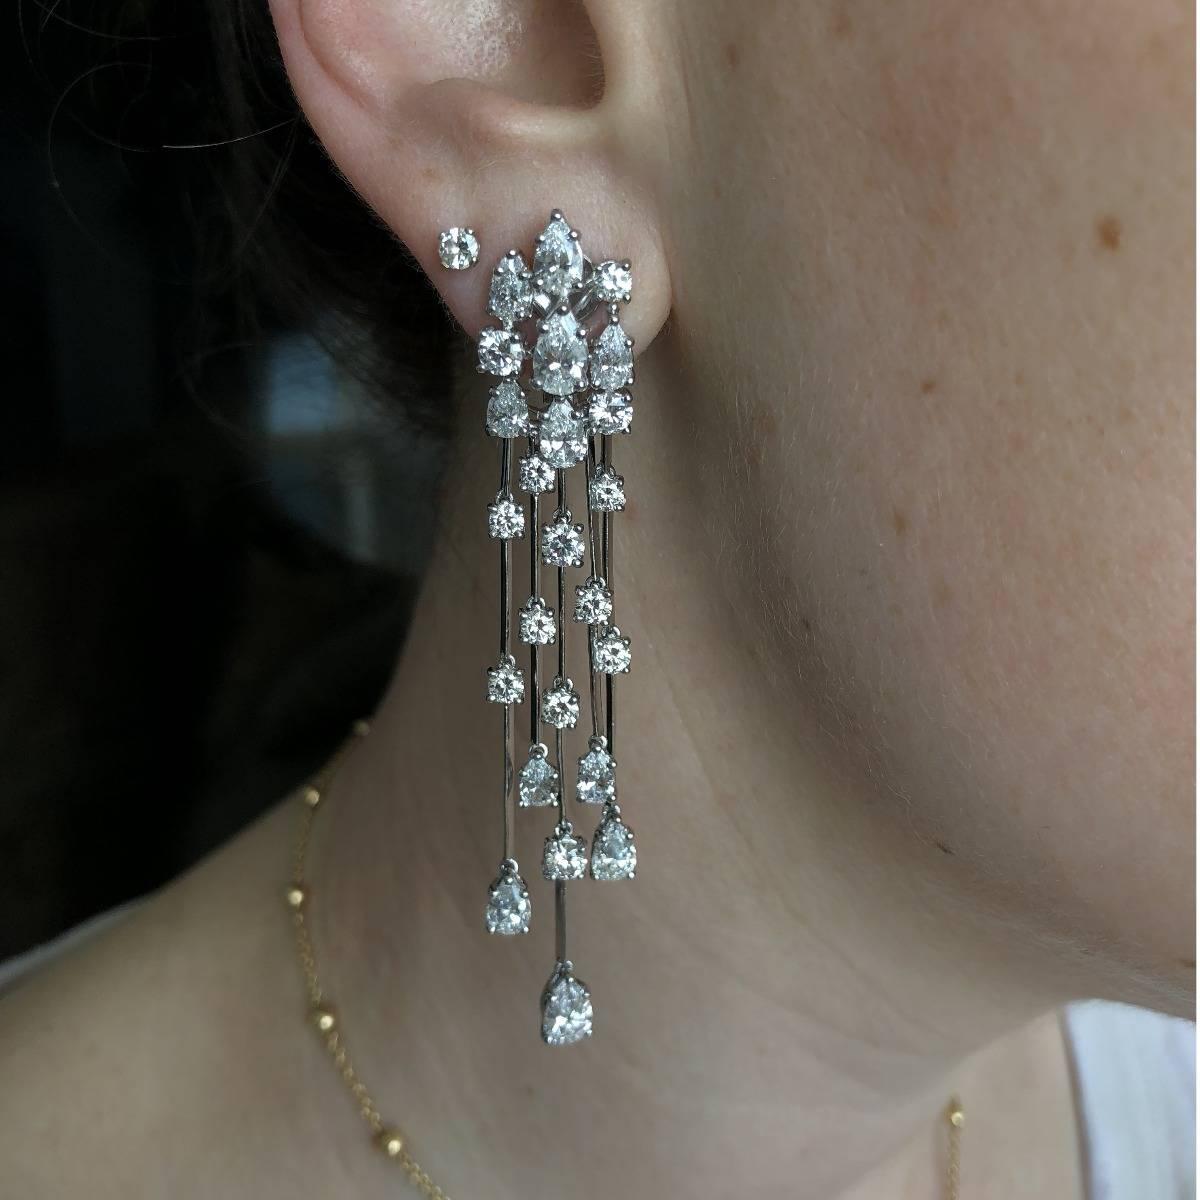 A magnificent pair of Graff earrings featuring a plethora of pear and round brilliant cut diamonds in platinum. These stunning earrings feature 3.39ct of VS, F color round brilliant cuts and 7.13ct of VS, F color pear shaped diamonds.

The earrings